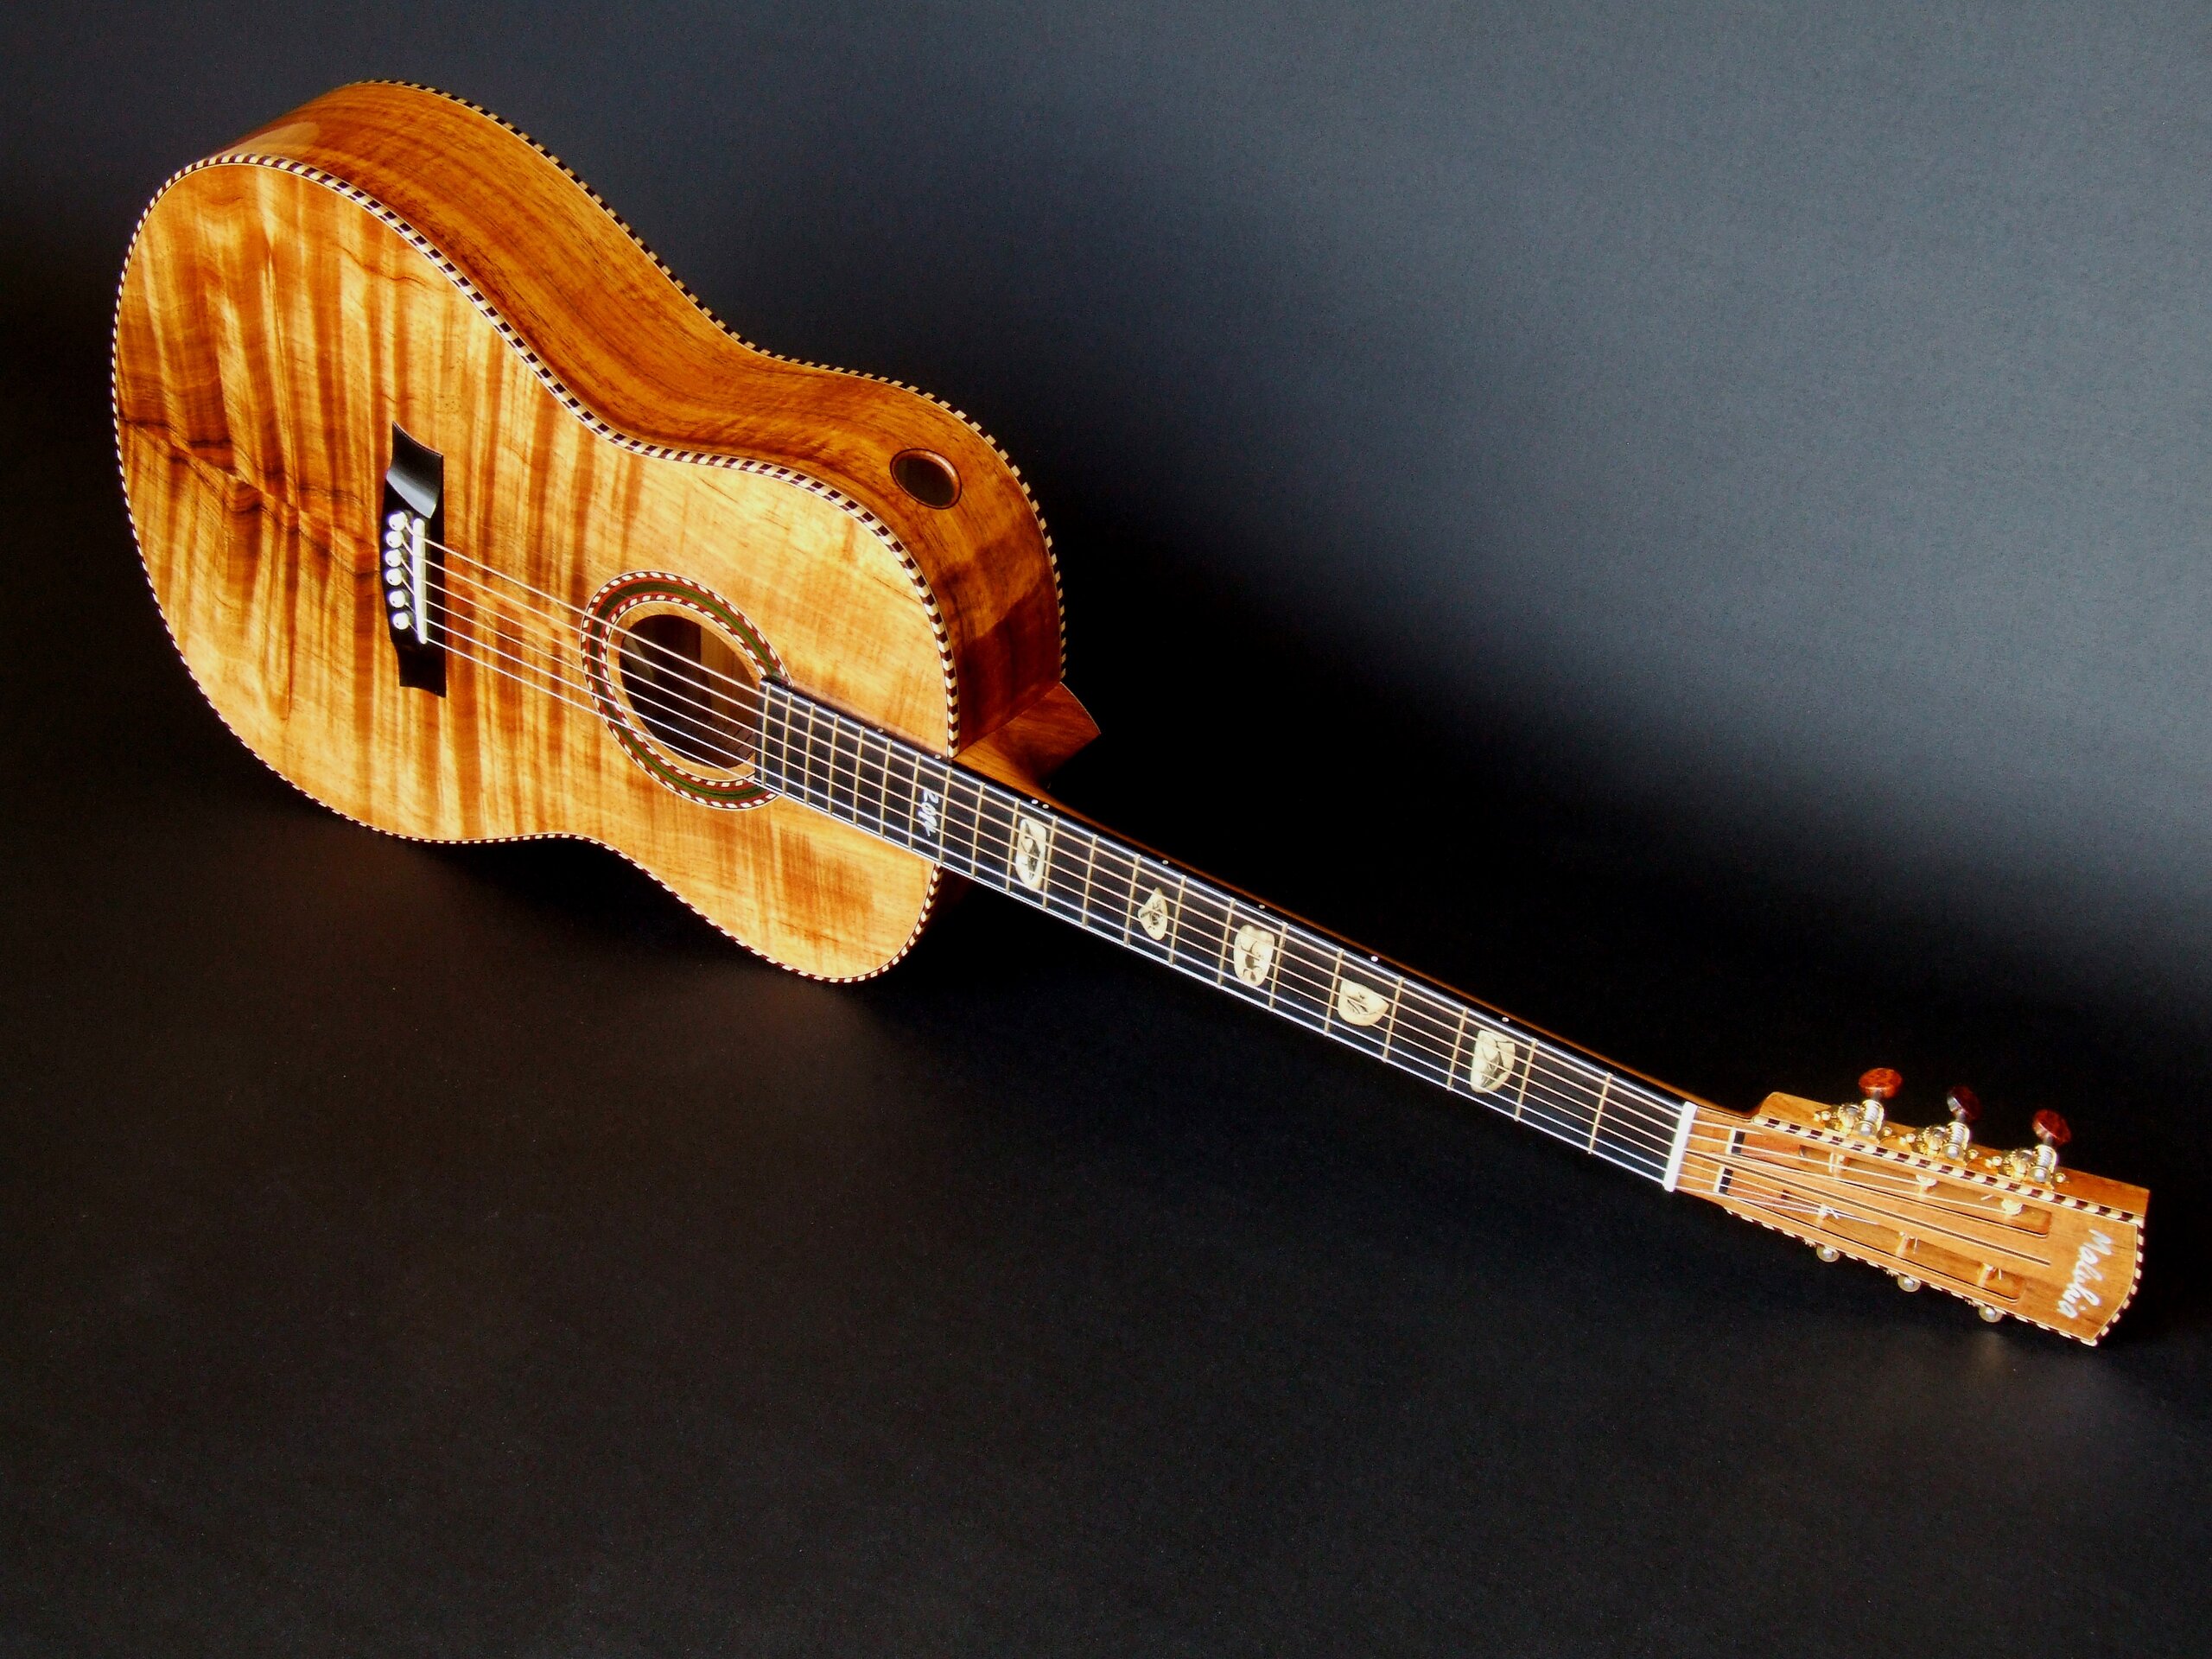 Koa top guitar with sound port and rope binding